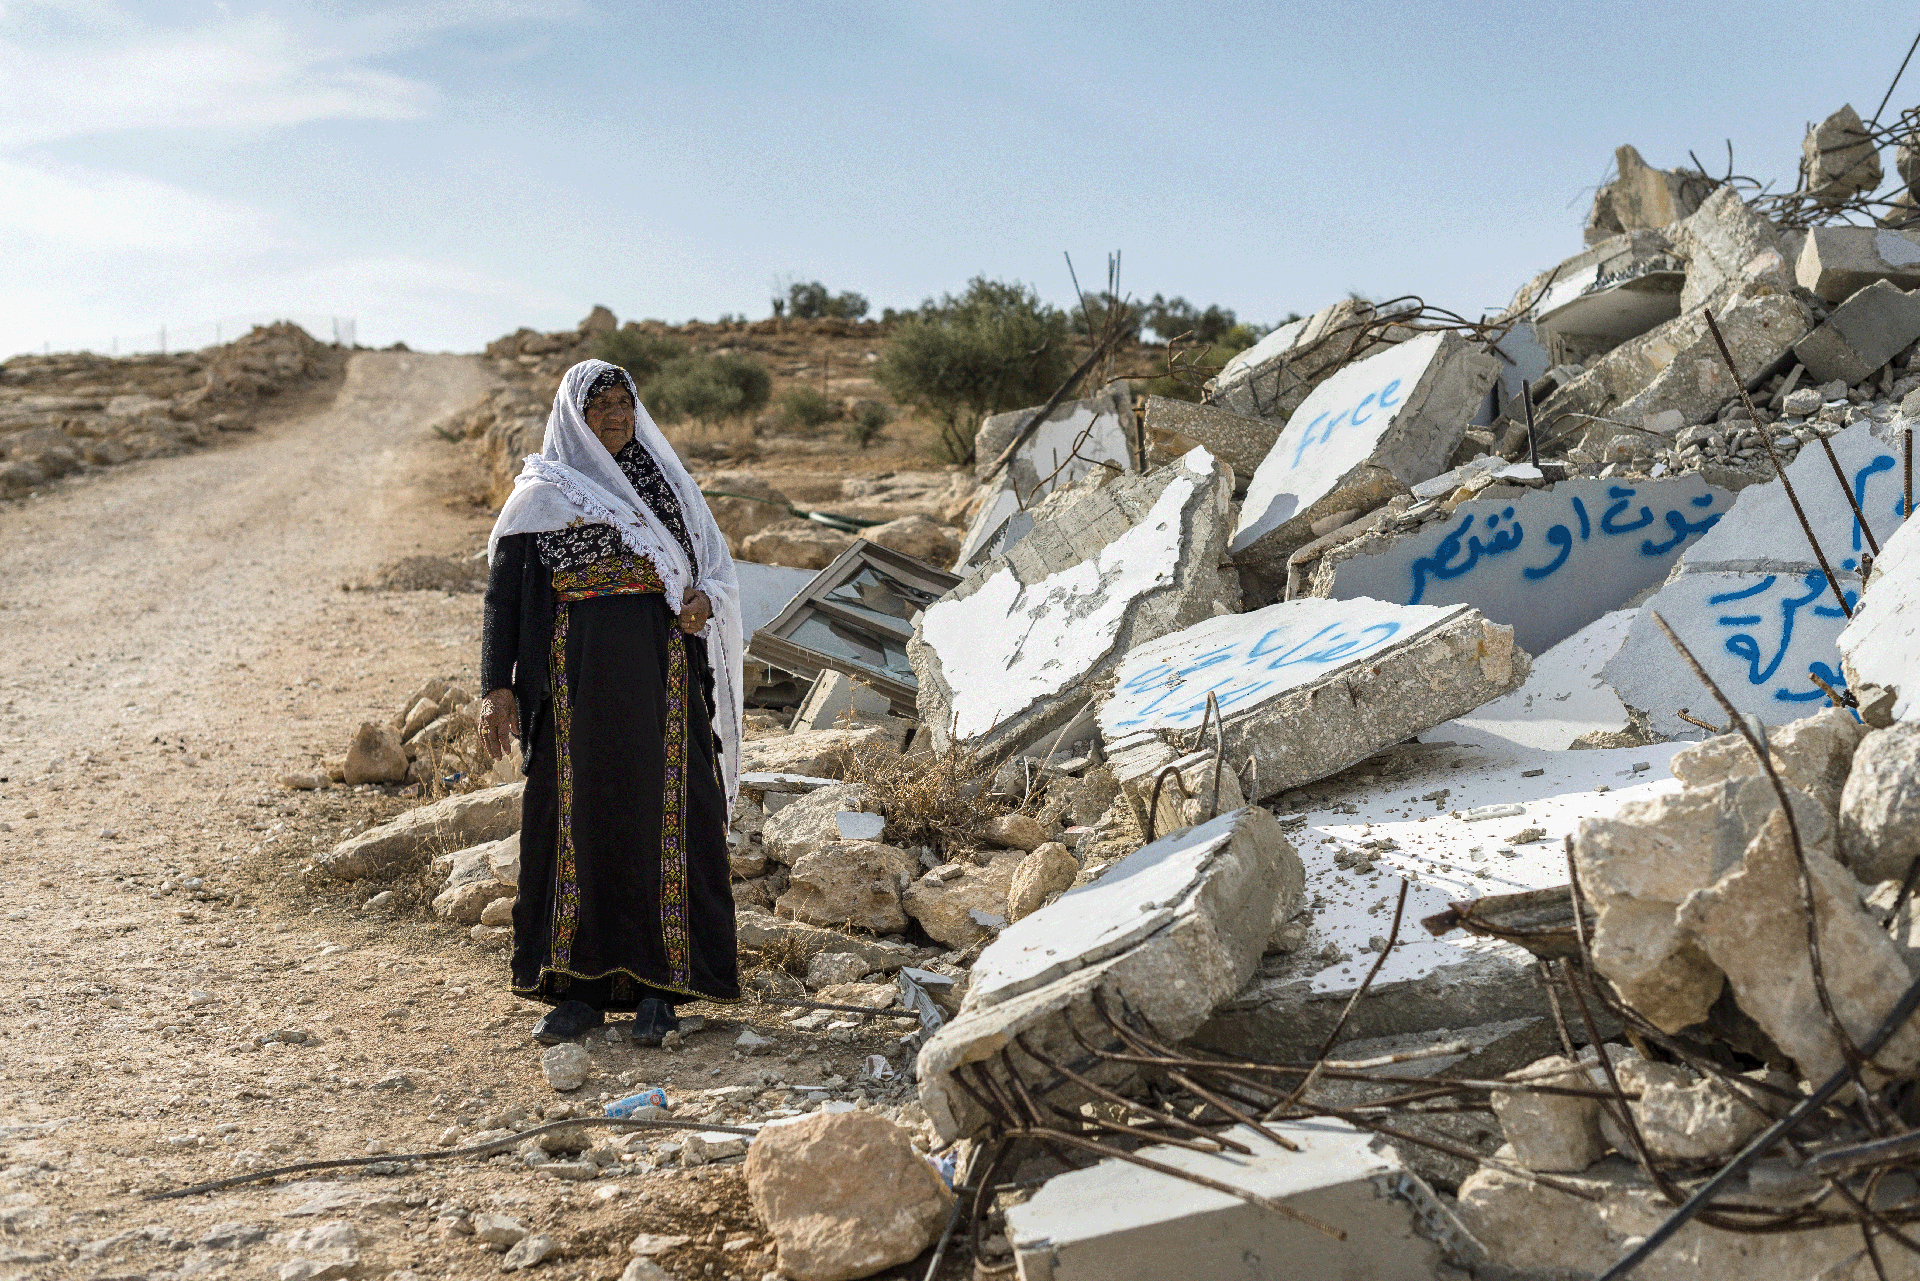 In 2021, Israel demolished 199 Palestinian homes in the West Bank, according to the Israeli human rights NGO B'Tselem.